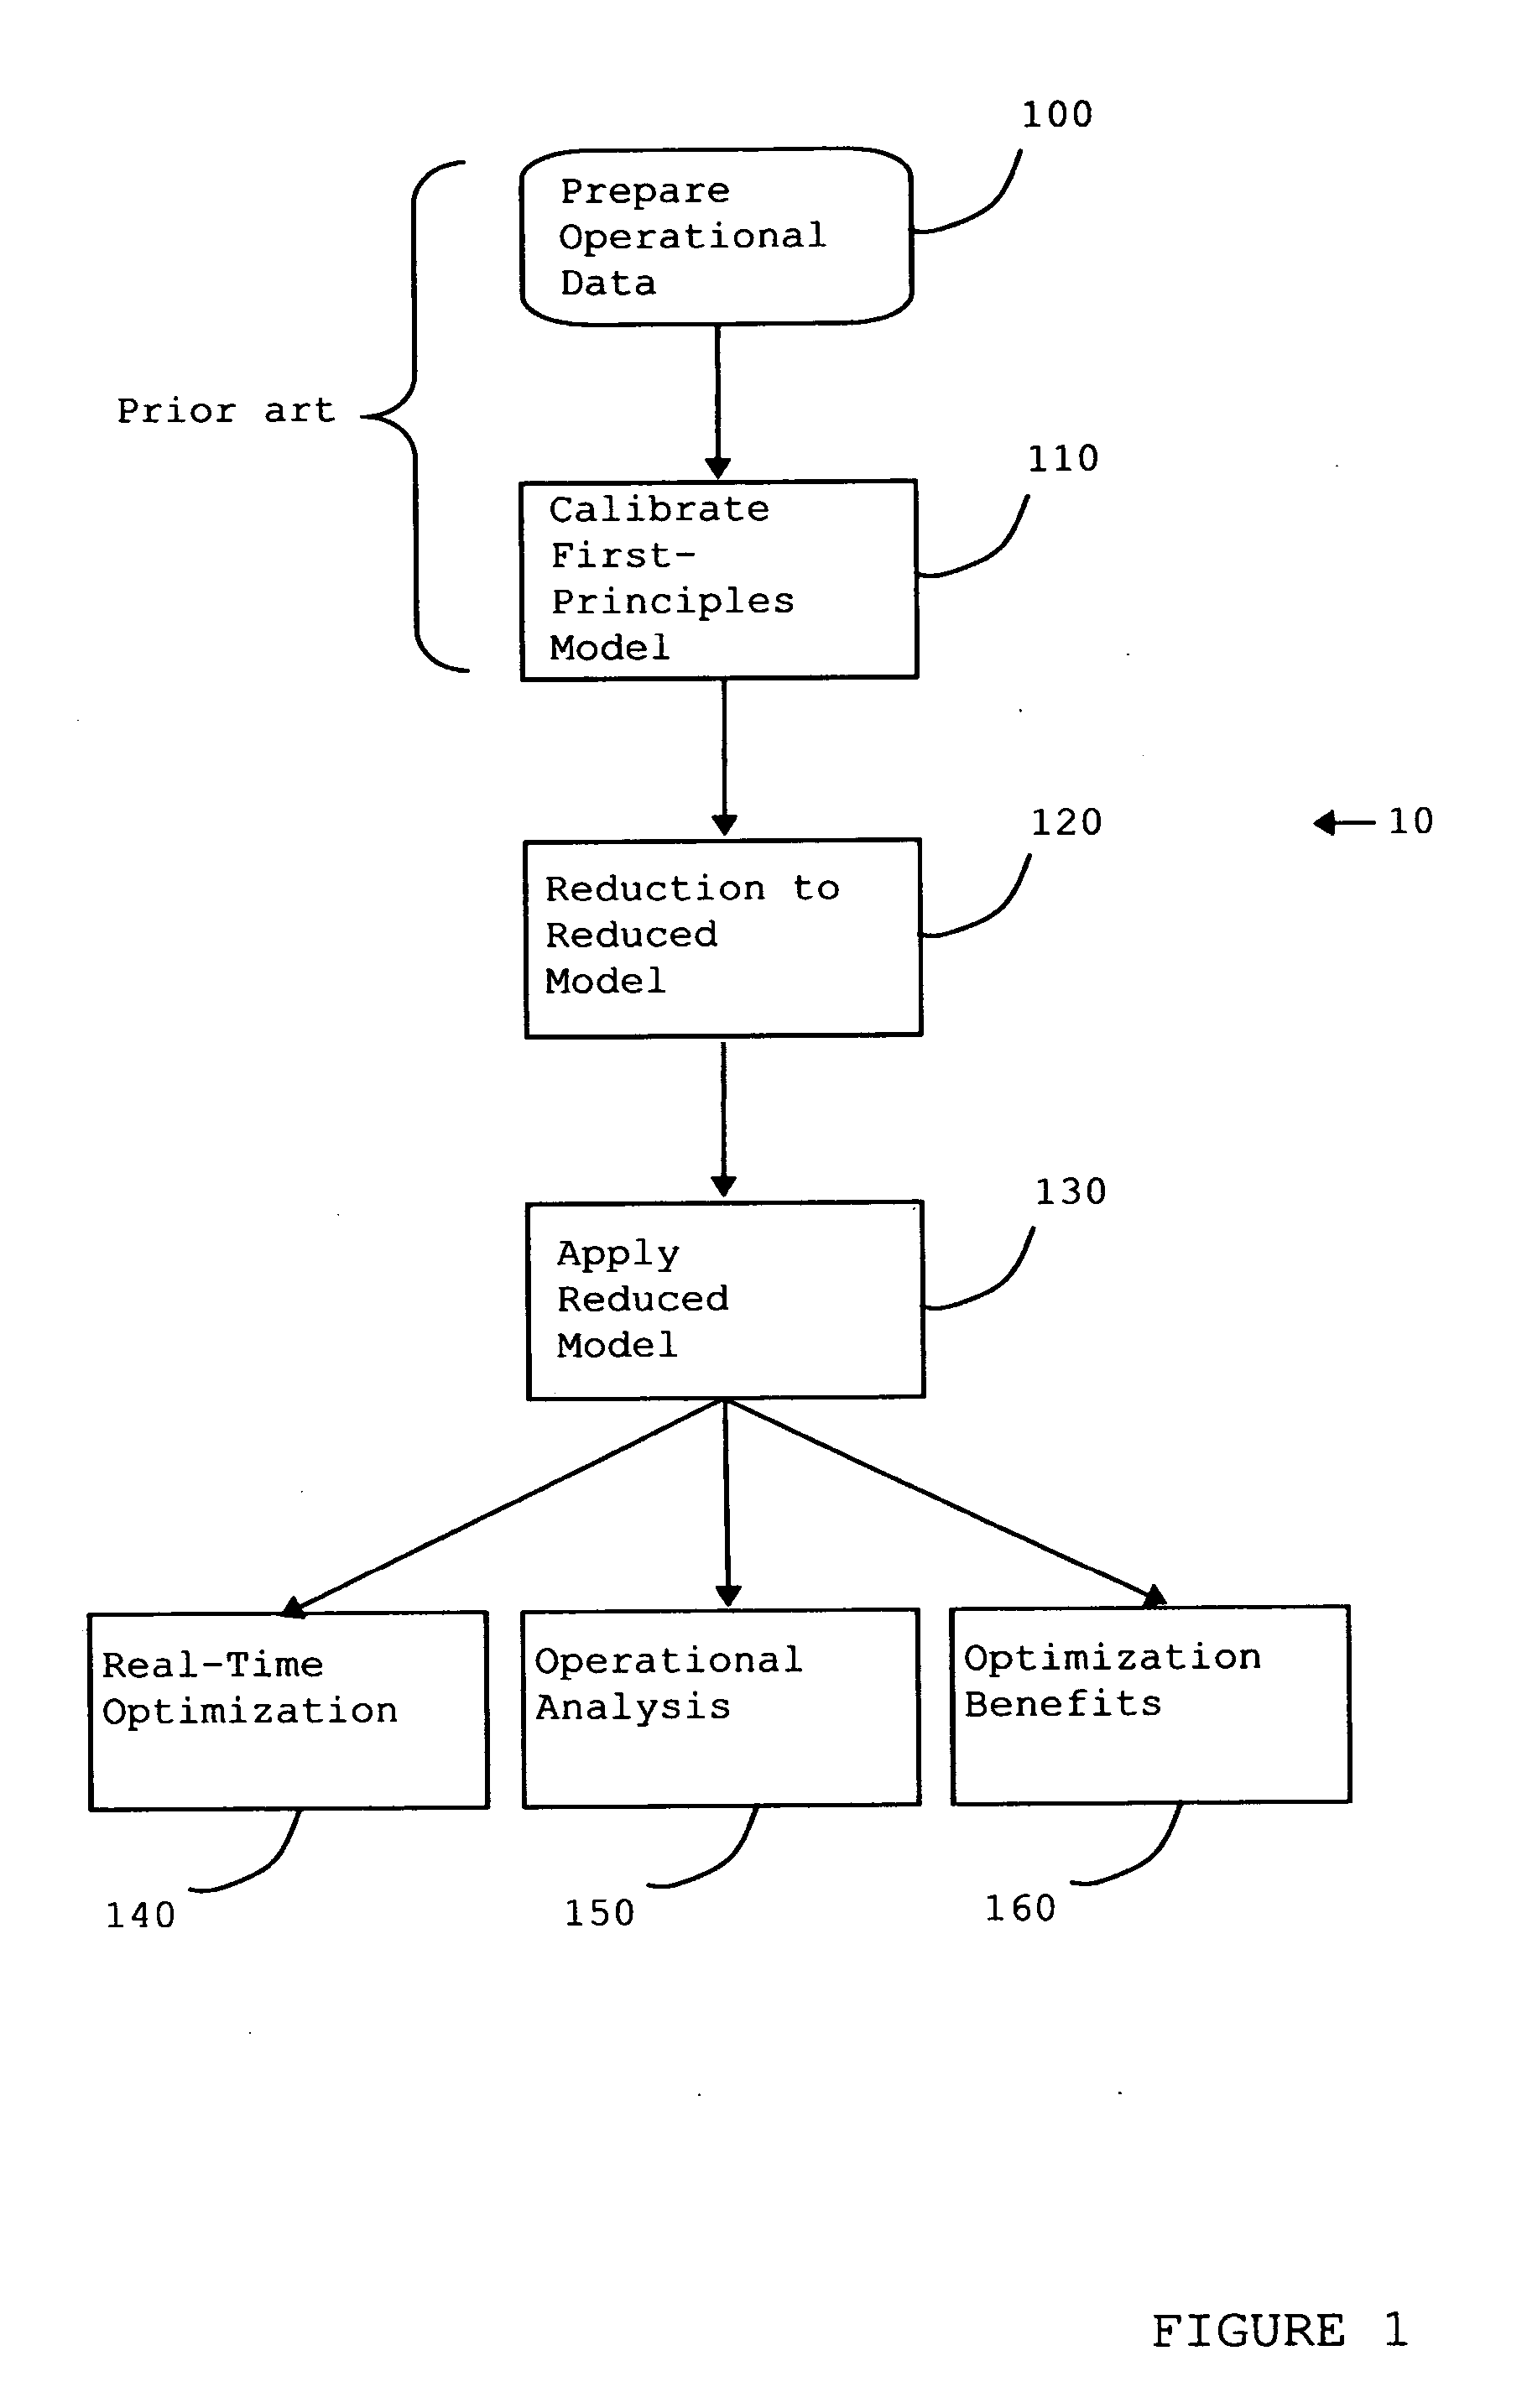 Method and apparatus for applying reduced nonlinear models to optimization of an operation